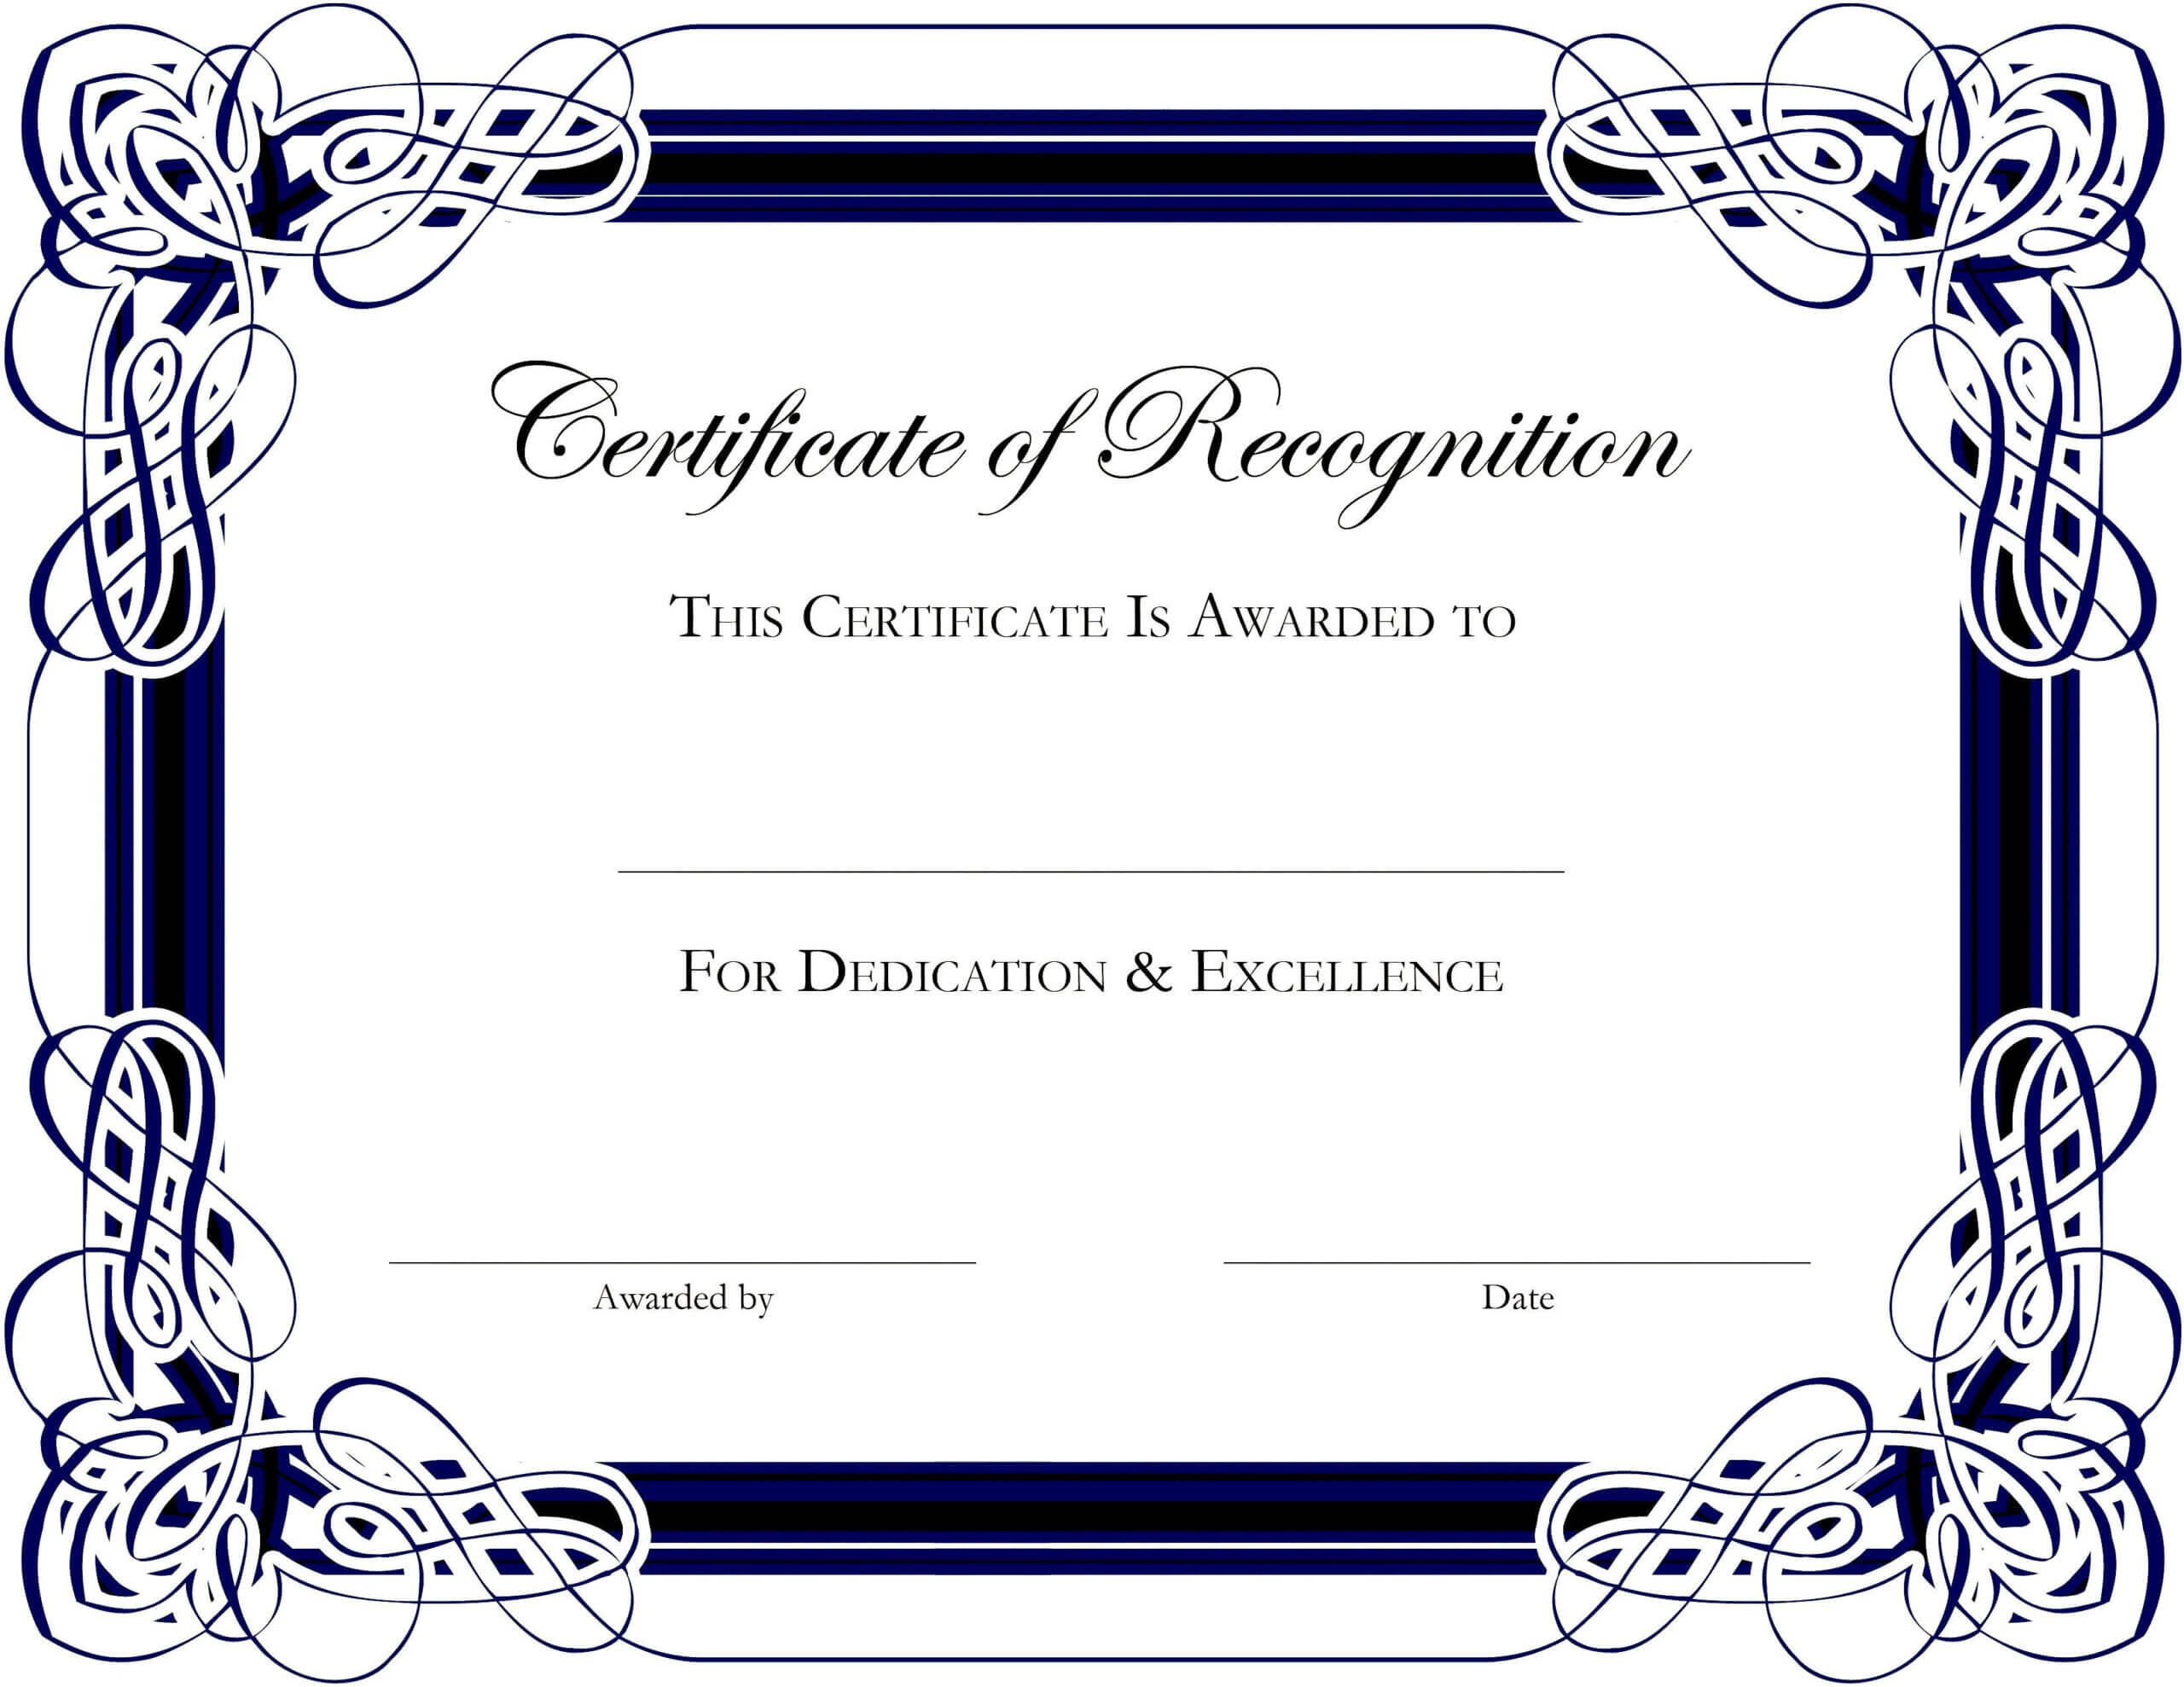 Award Templates For Microsoft Publisher | Besttemplate123 Inside Certificate Of Appreciation Template Free Printable